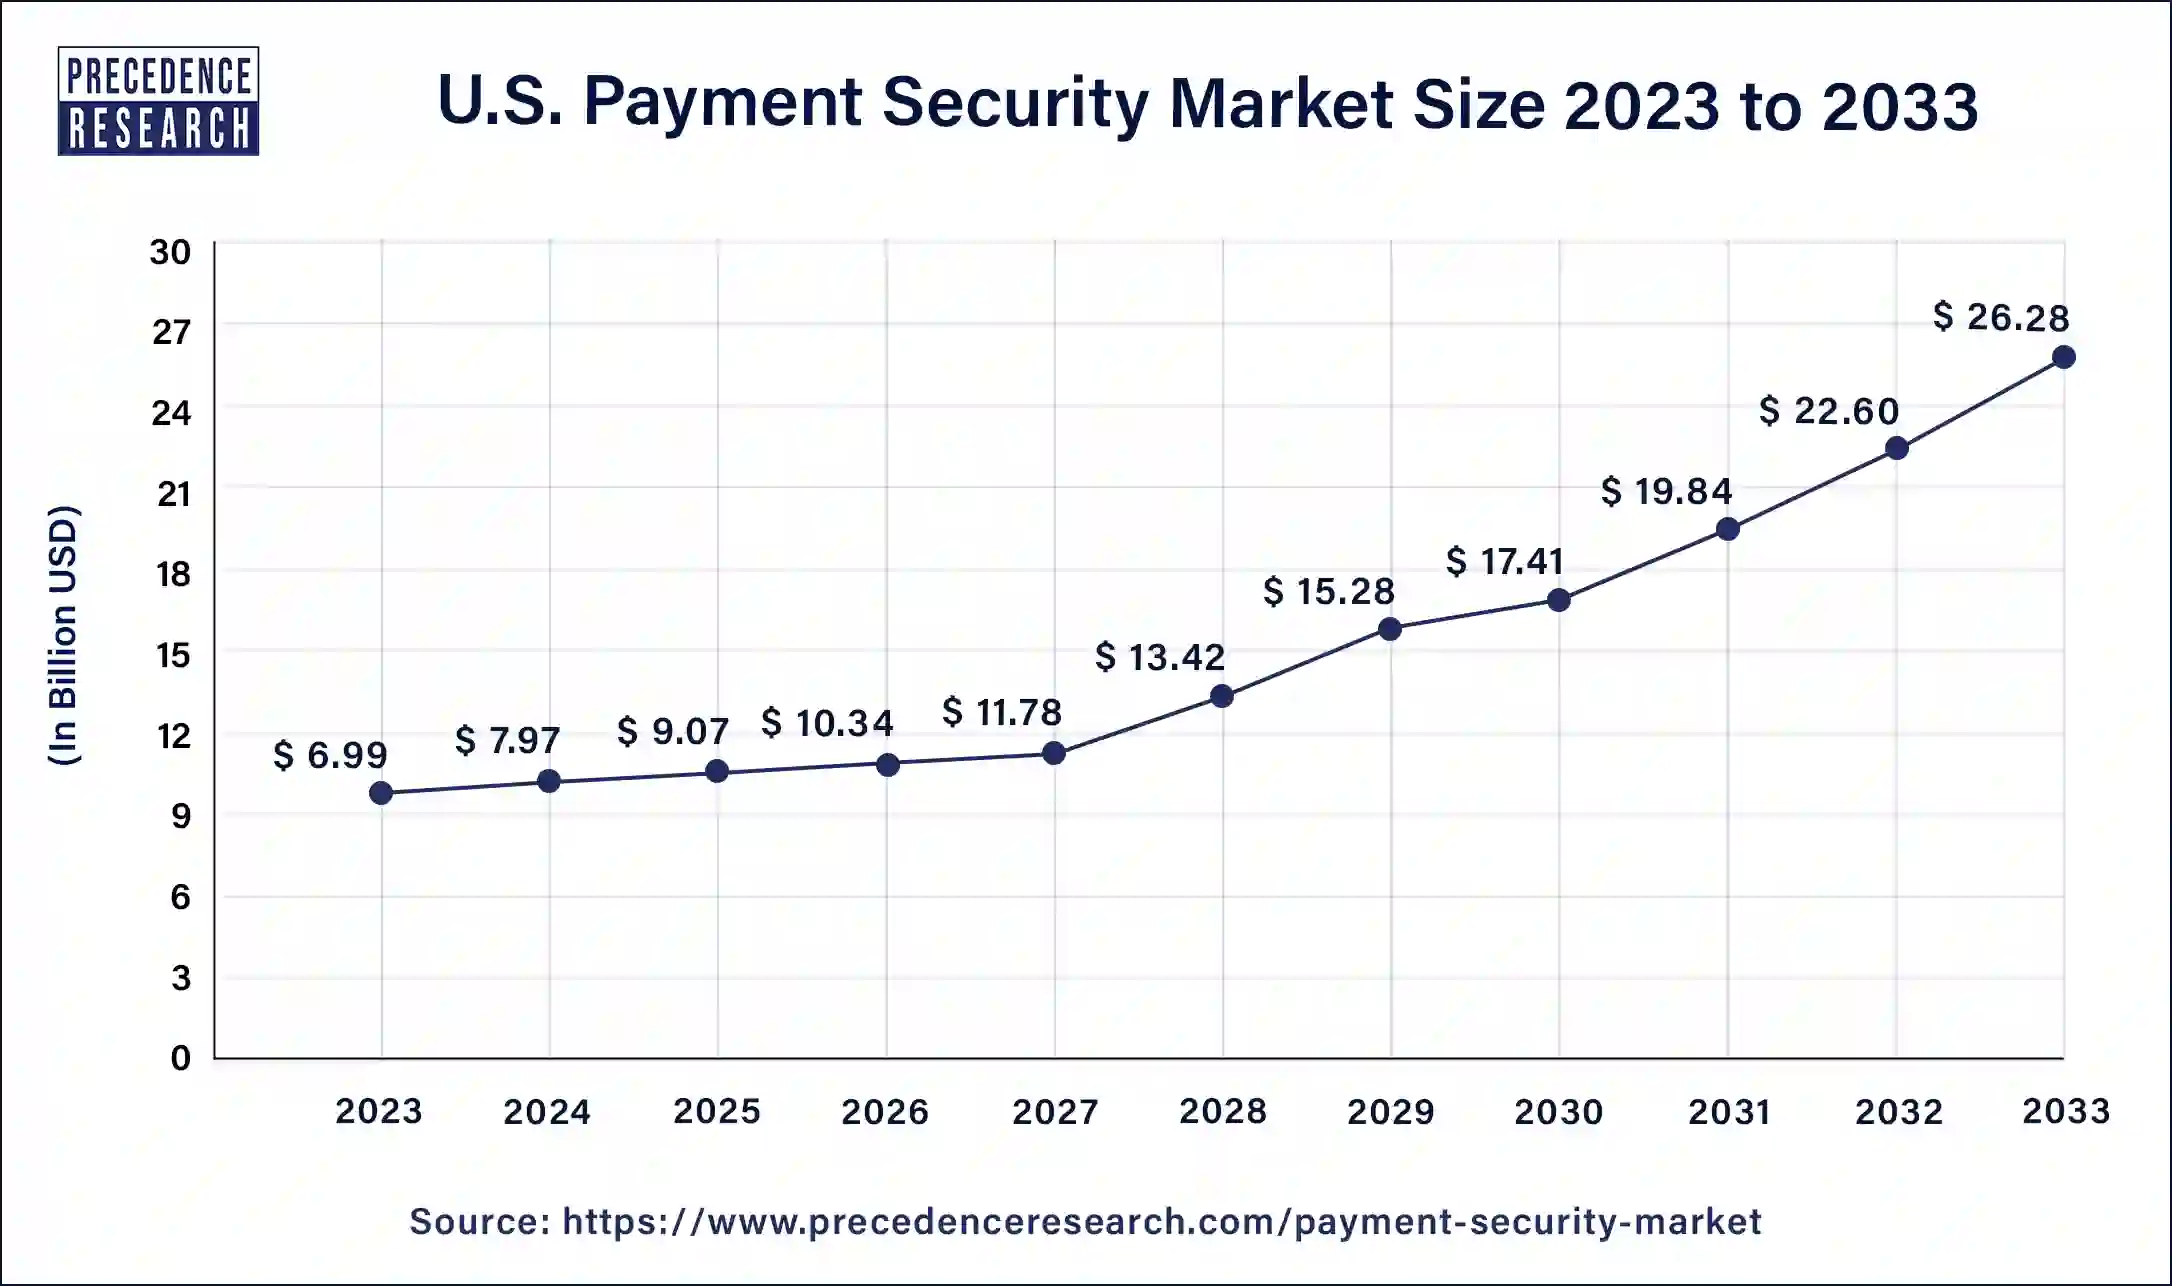 U.S. Payment Security Market Size 2024 to 2033